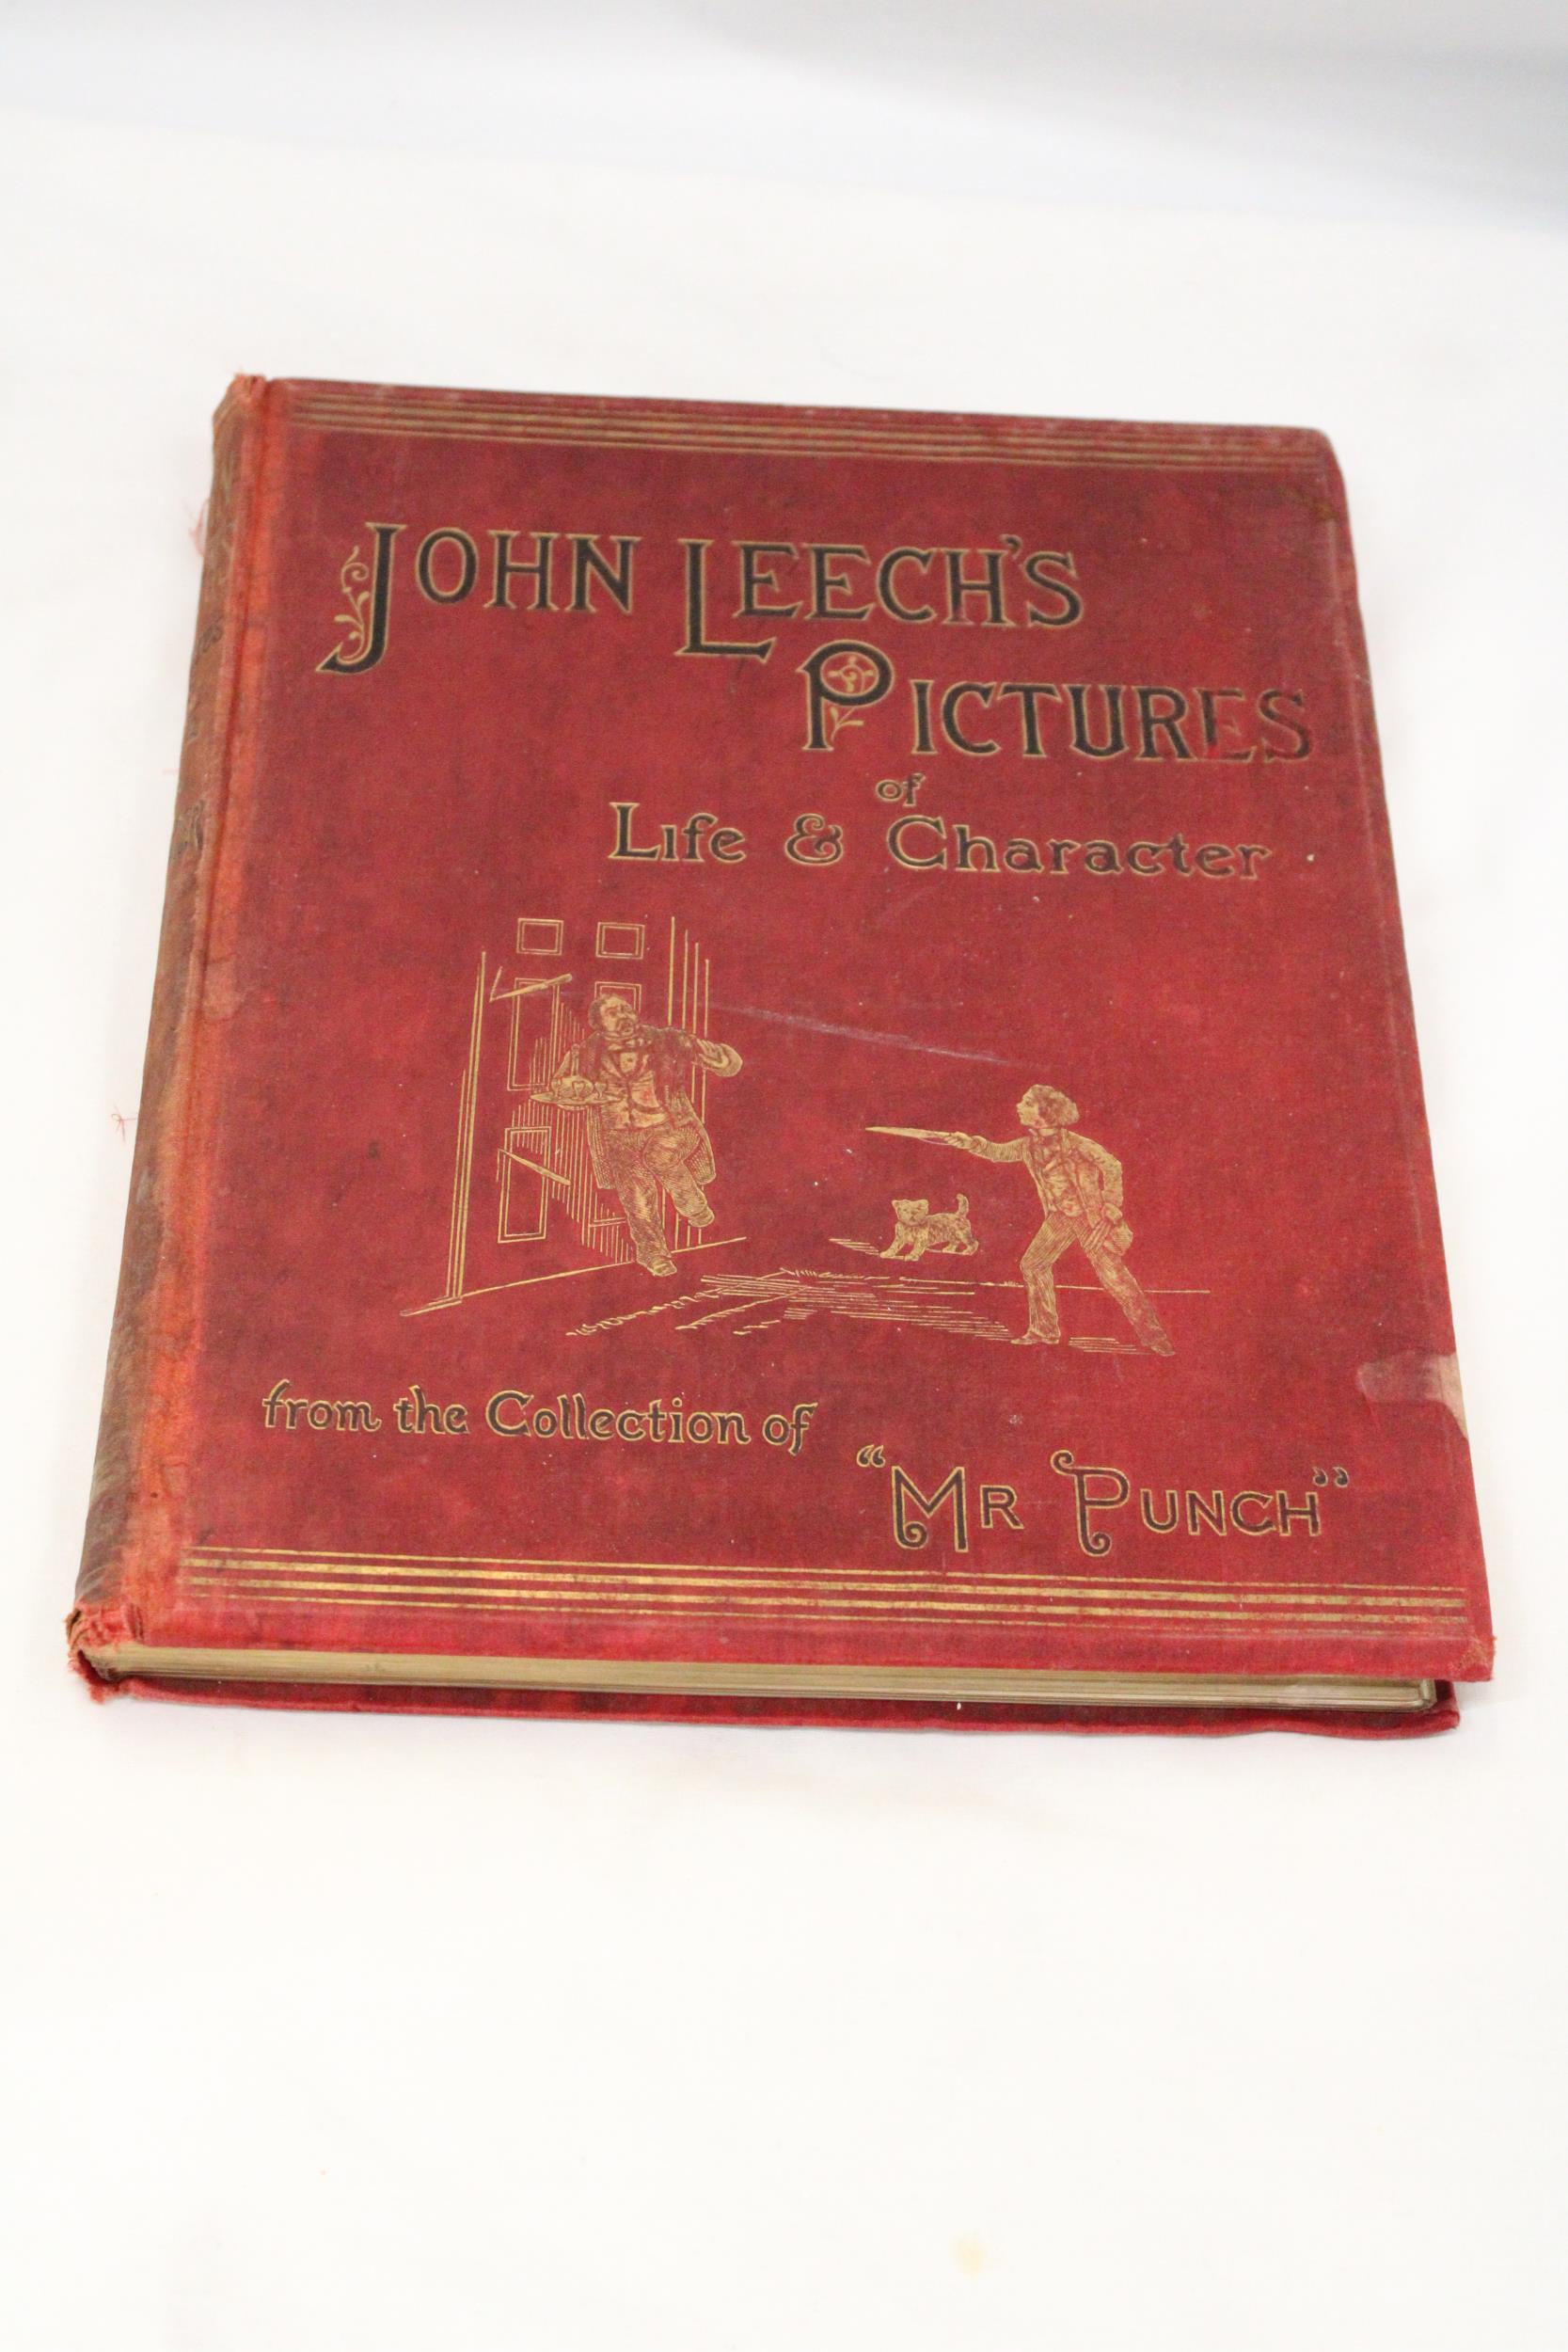 AN ANTIQUARIAN, 1886, COPY OF, JOHN LEECH'S PICTURES OF LIFE AND CHARACTER, FROM THE COLLECTION